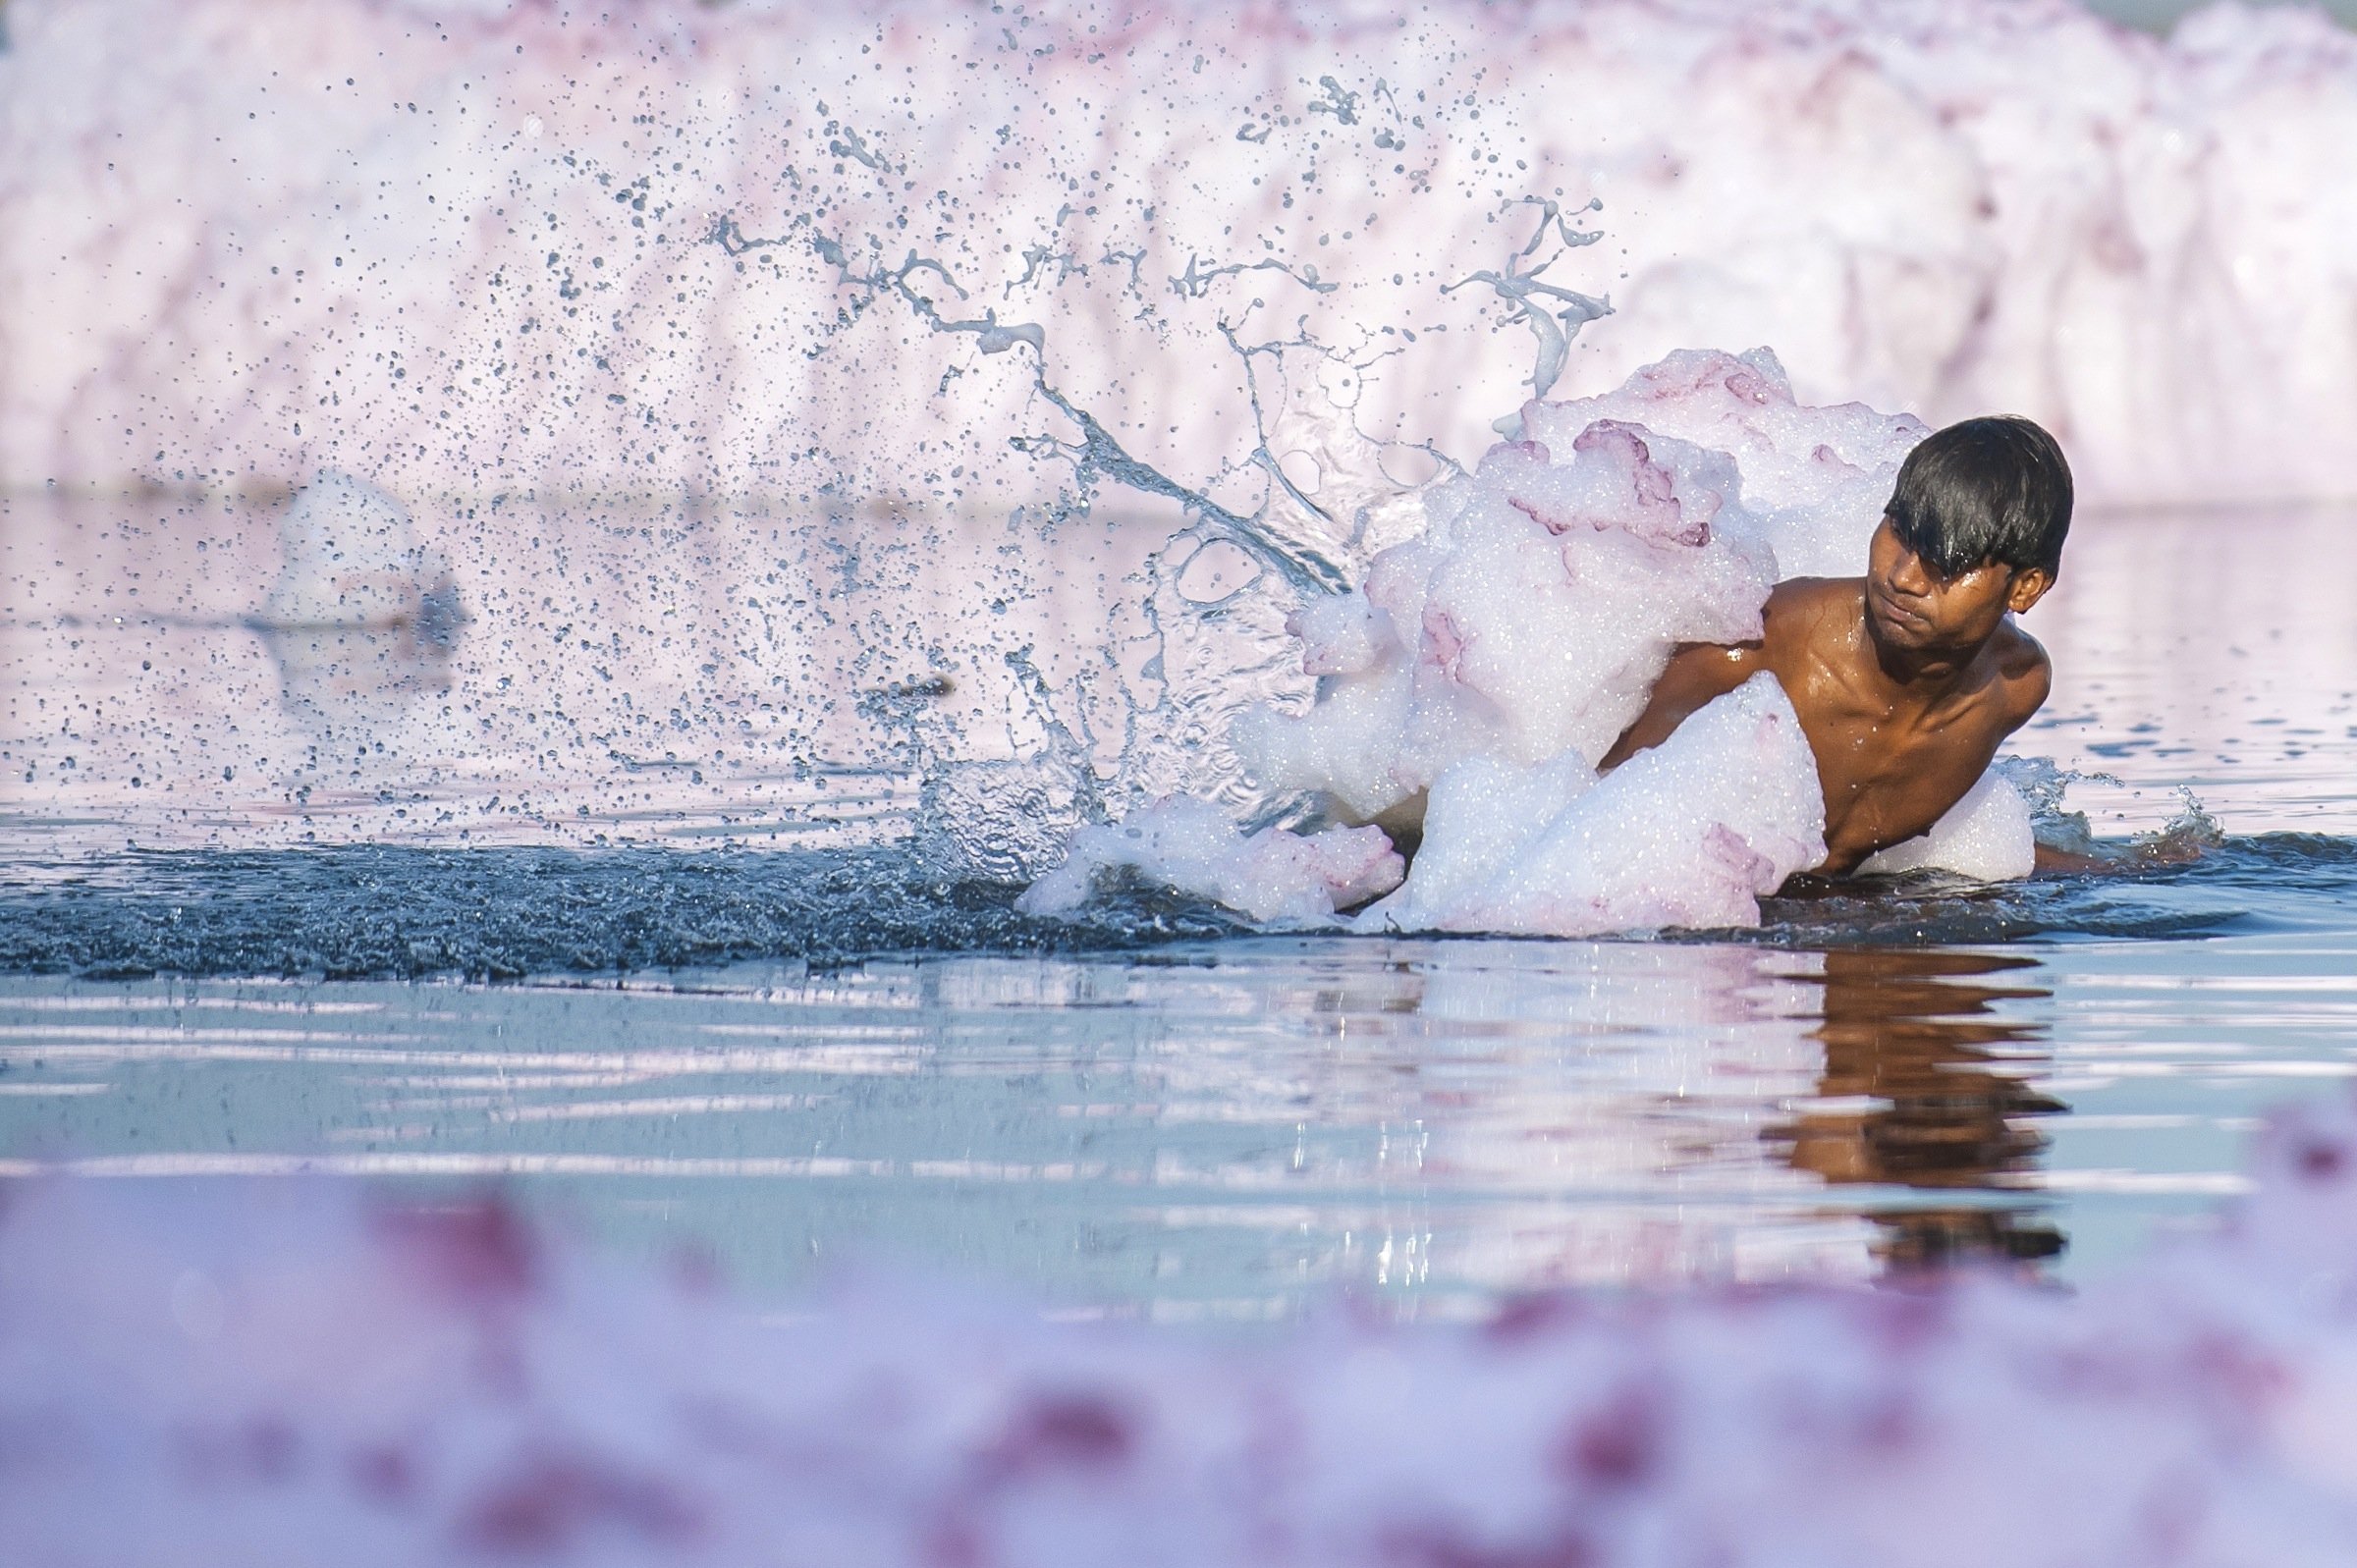 A man tries to get rid of a thick layer of flowing foam as he takes a bath in river Yamuna on March 19, 2014 in New Delhi. Yamuna is the largest tributary of the holy river, Ganges, and has often been described as the most polluted water body in northern India. The extreme pollution levels cause deposition of foam on the top surface of the river.